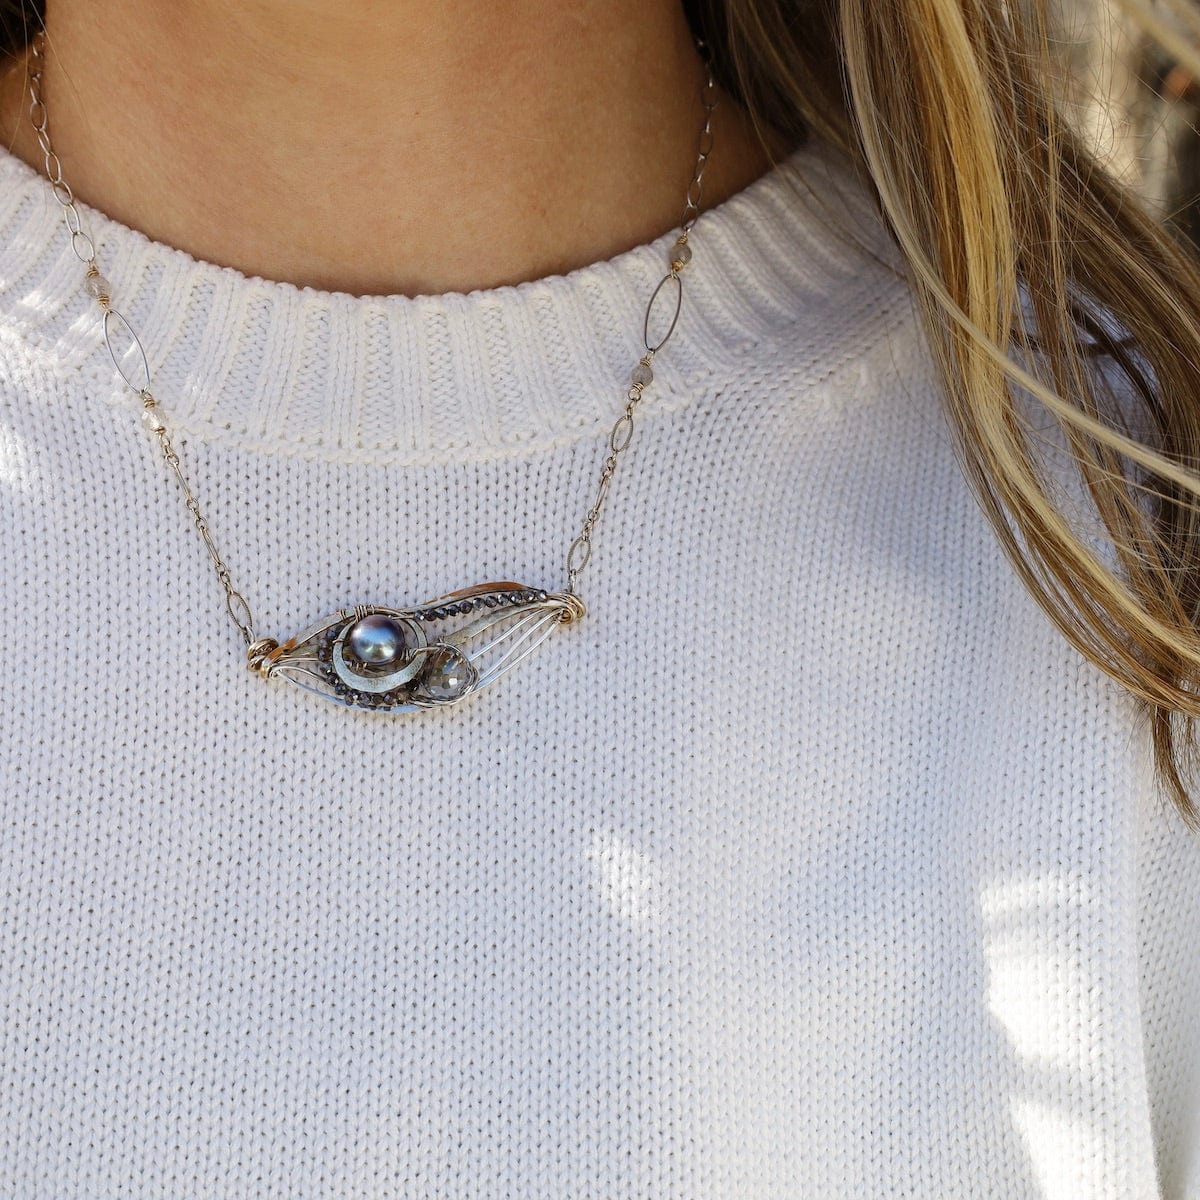 NKL Sea Mussel Necklace